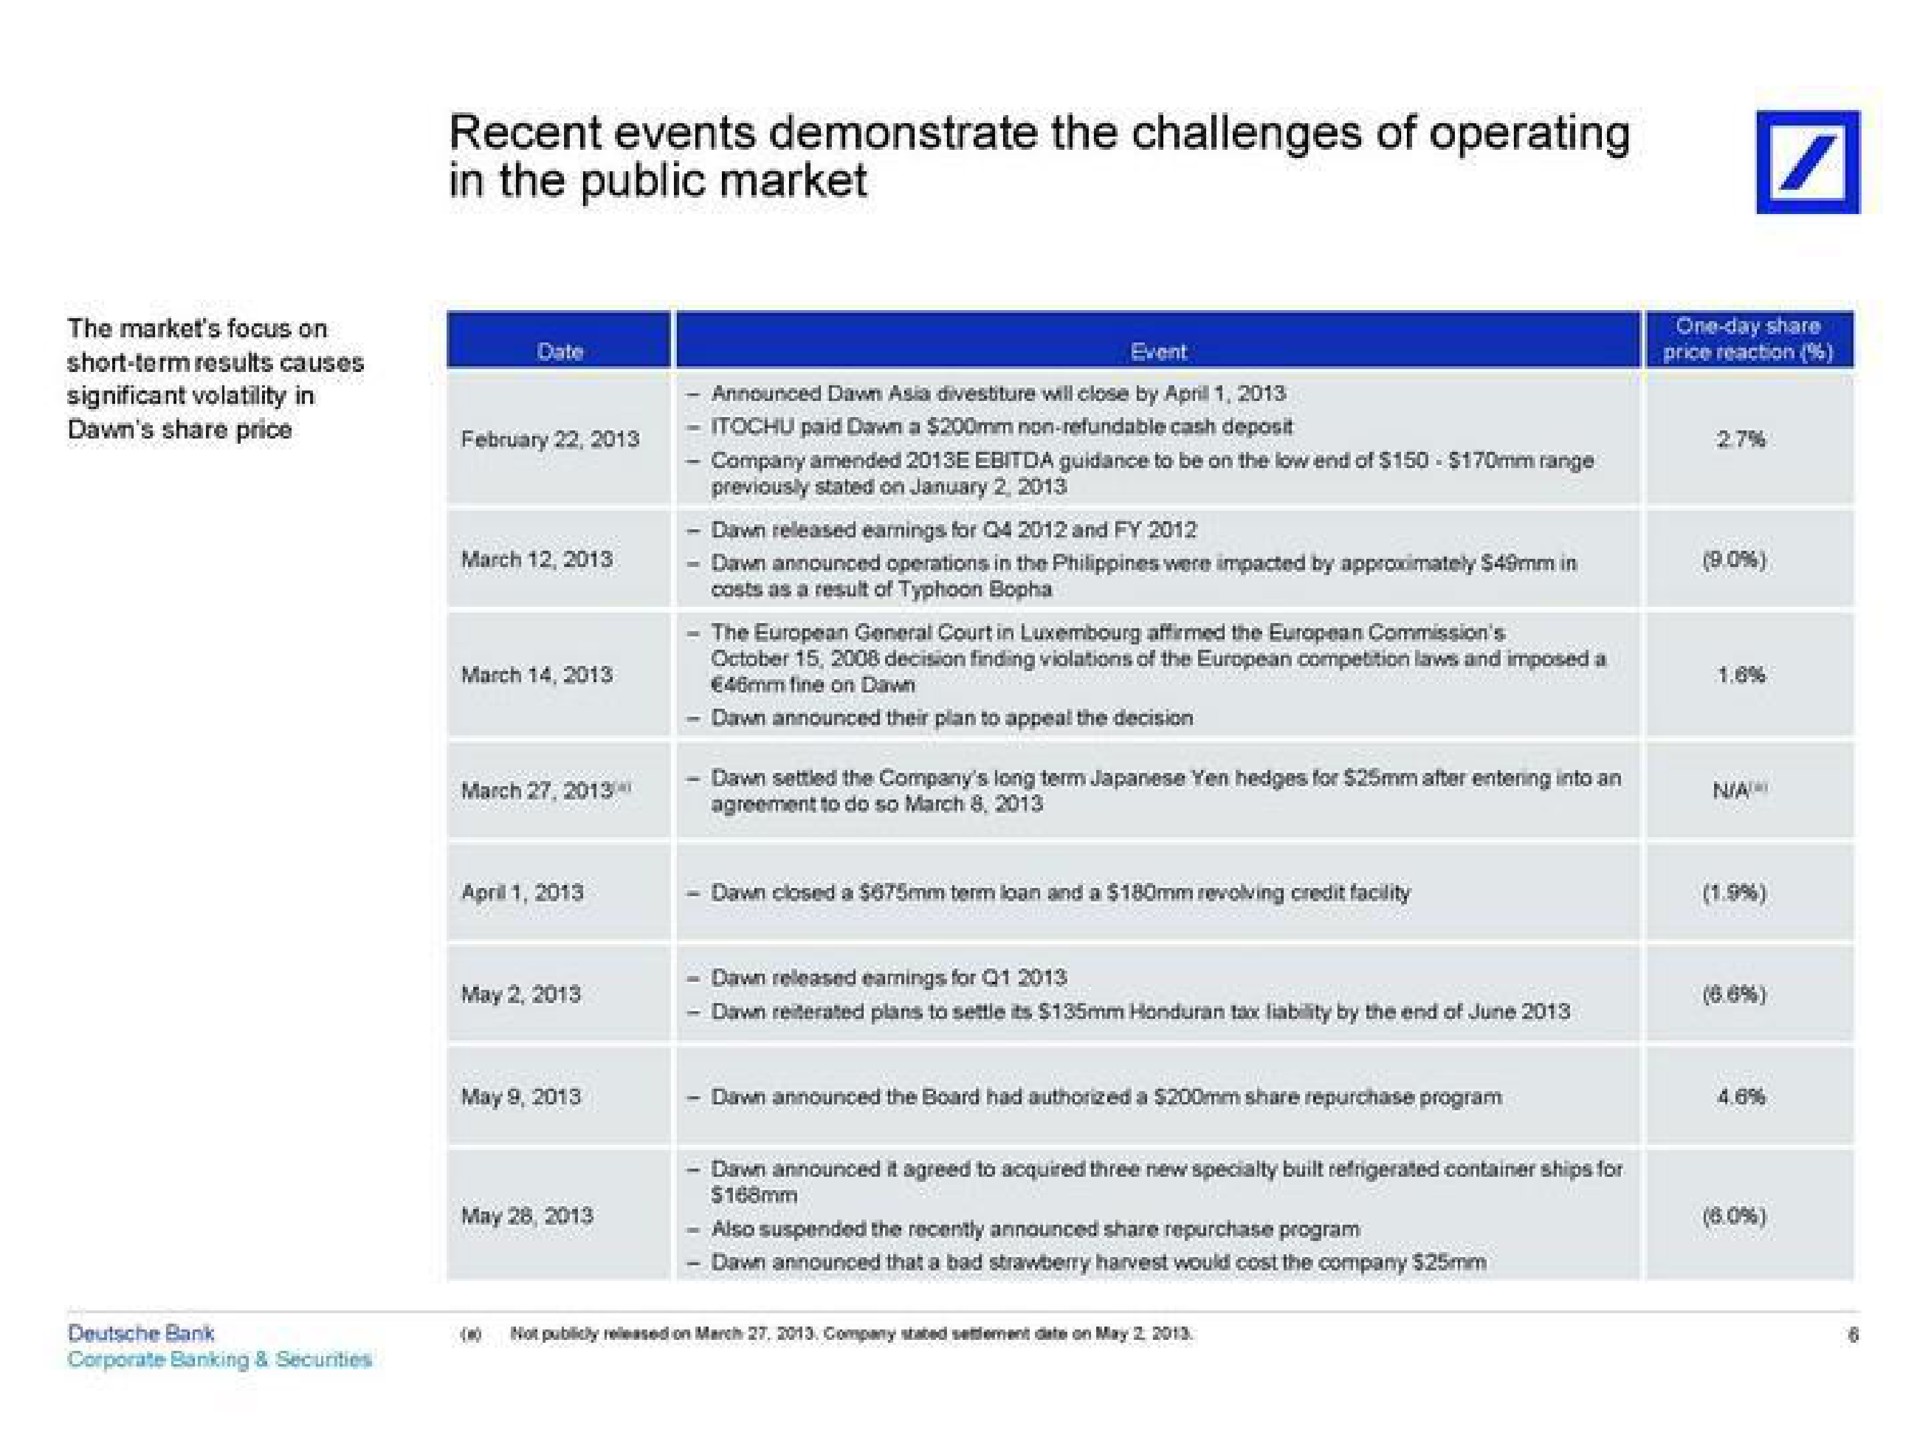 recent events demonstrate the challenges of operating in the public market | Deutsche Bank